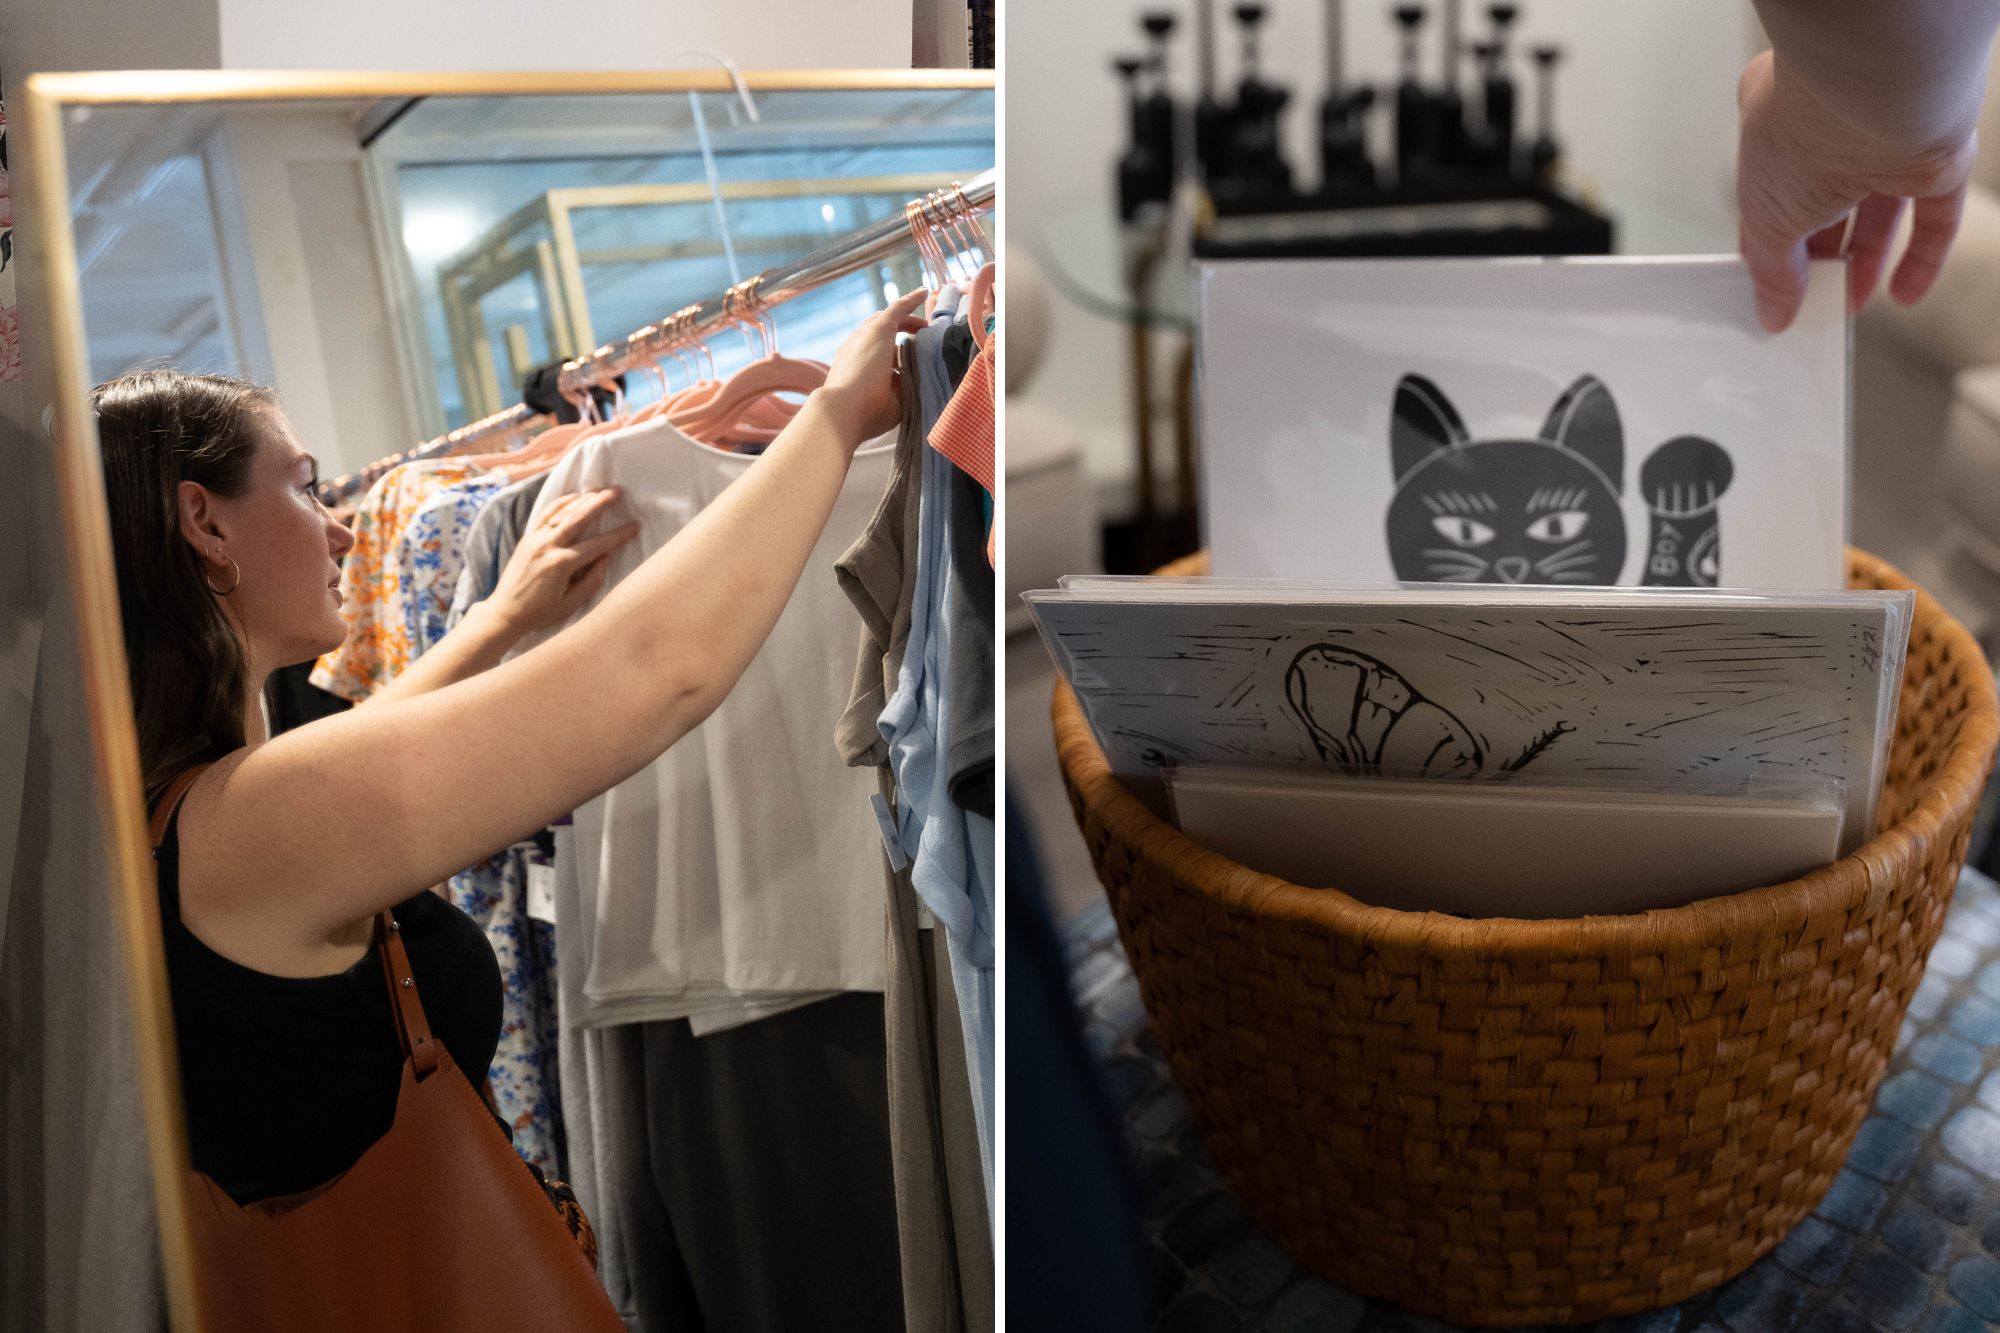 Two images: Alyssa browsing a rack of clothing, and a basket of art prints (a cat print is visible)